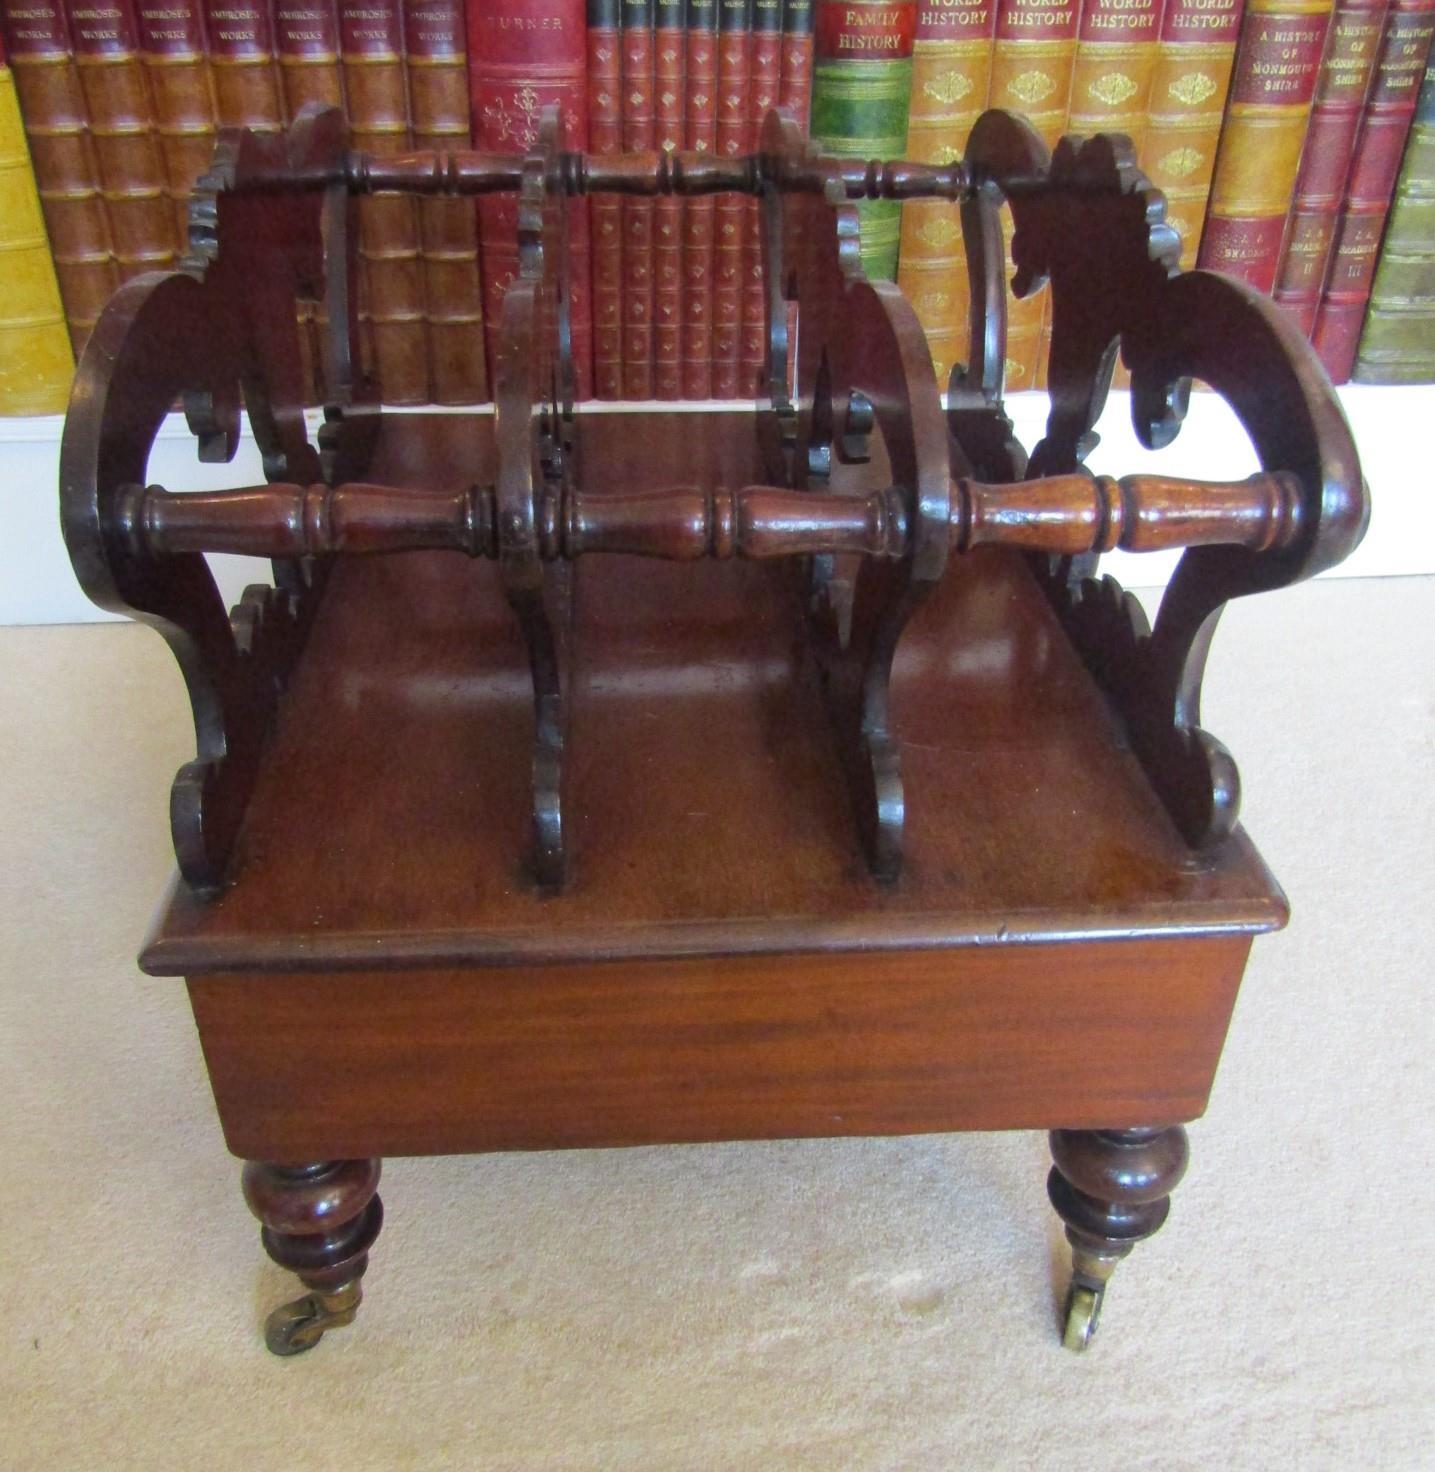 A Regency mahogany four divisional Canterbury, with carved and scrolled detail, over a single frieze - Image 2 of 2